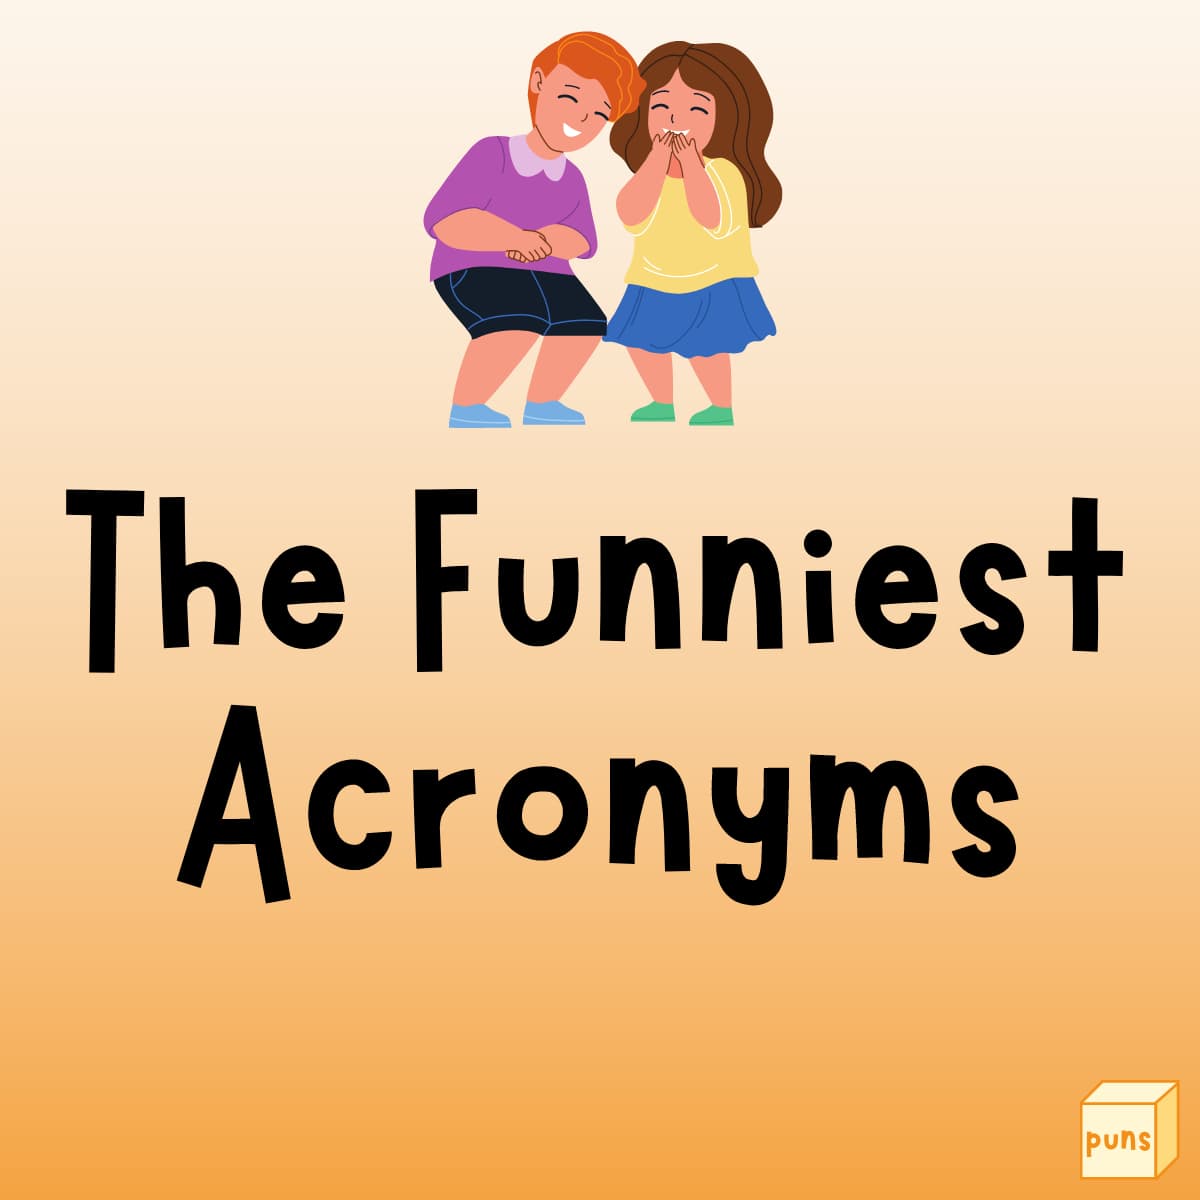 50+ Funny Acronyms That Are Creative and Clever - Box of Puns